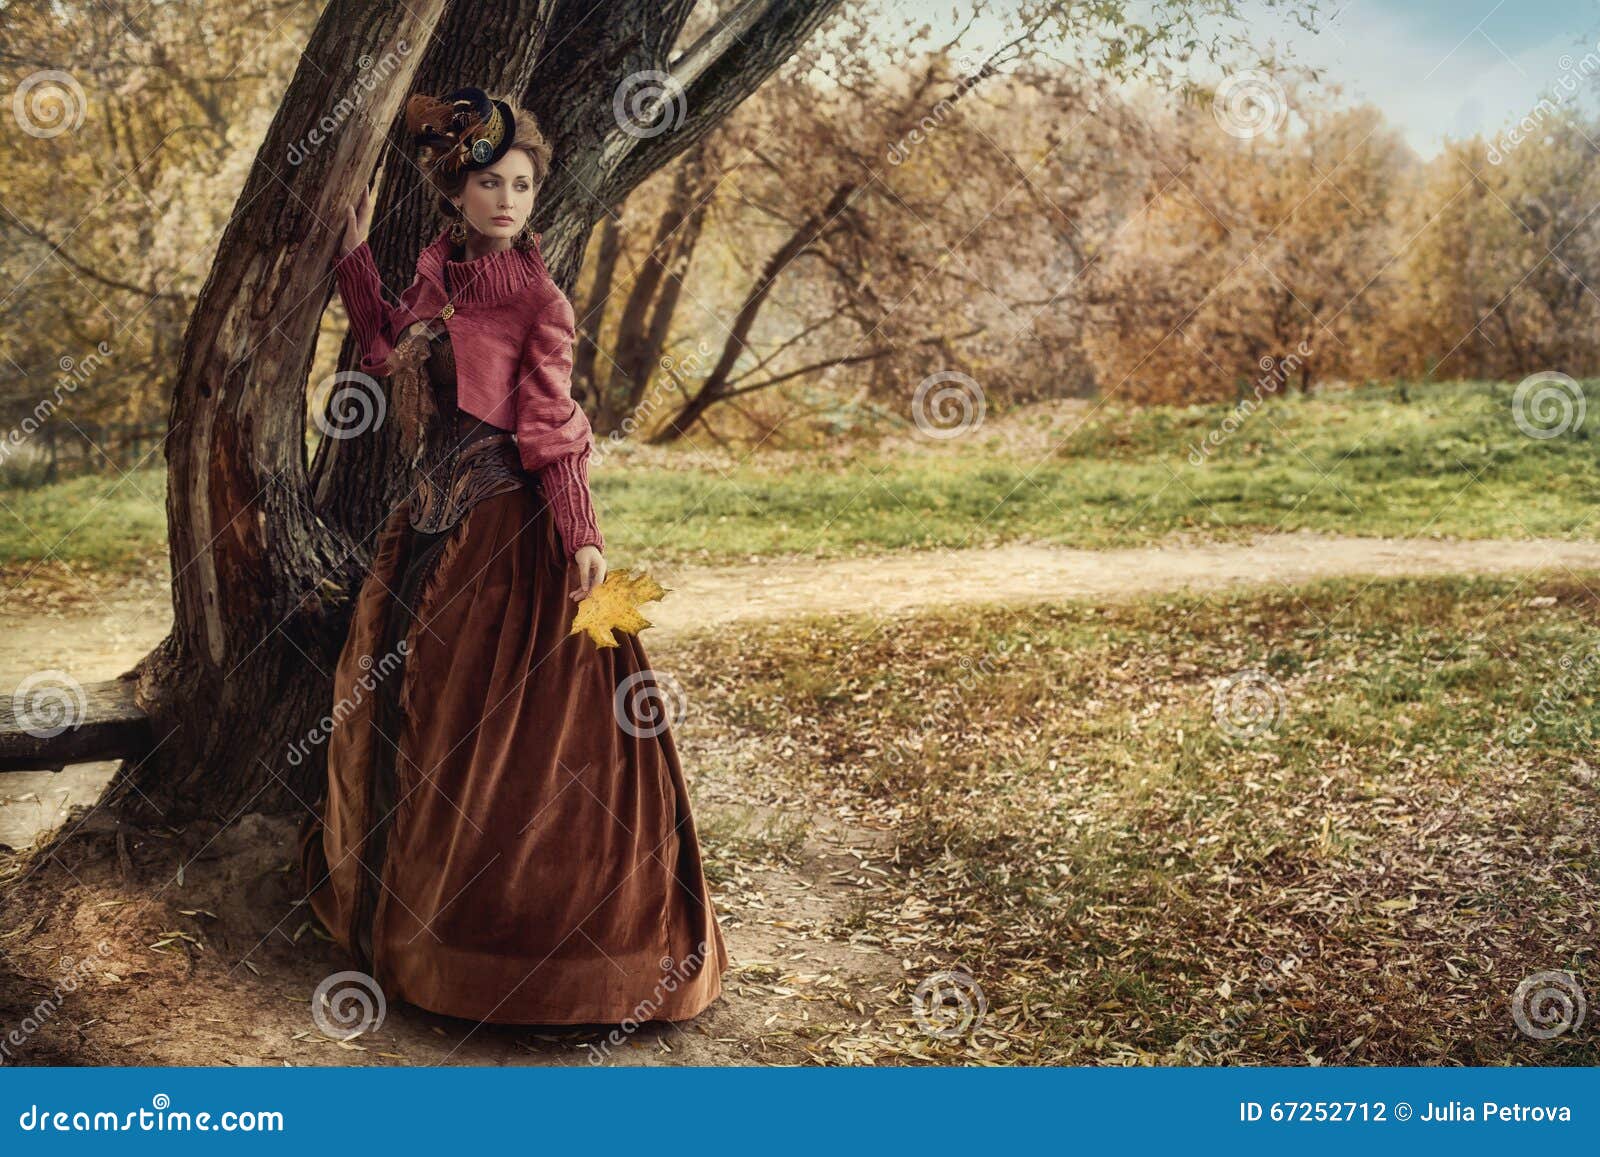 woman in historical dress near the tree in autumn forest.